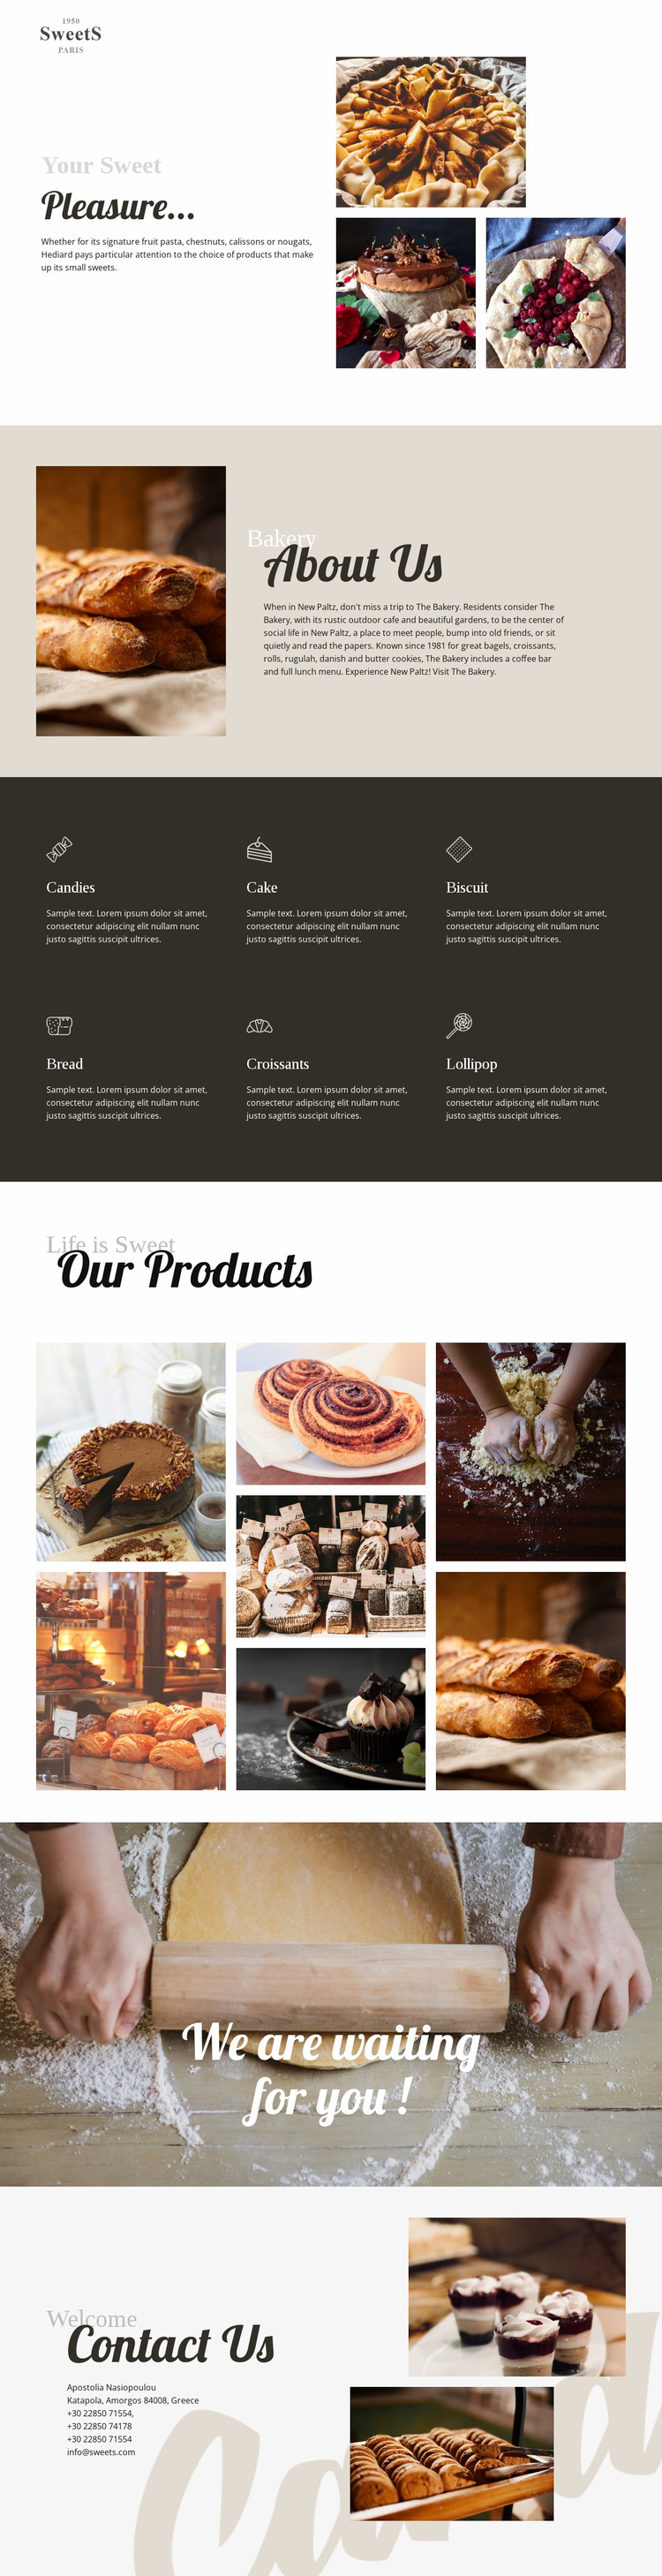 Cakes and baking food Website Template